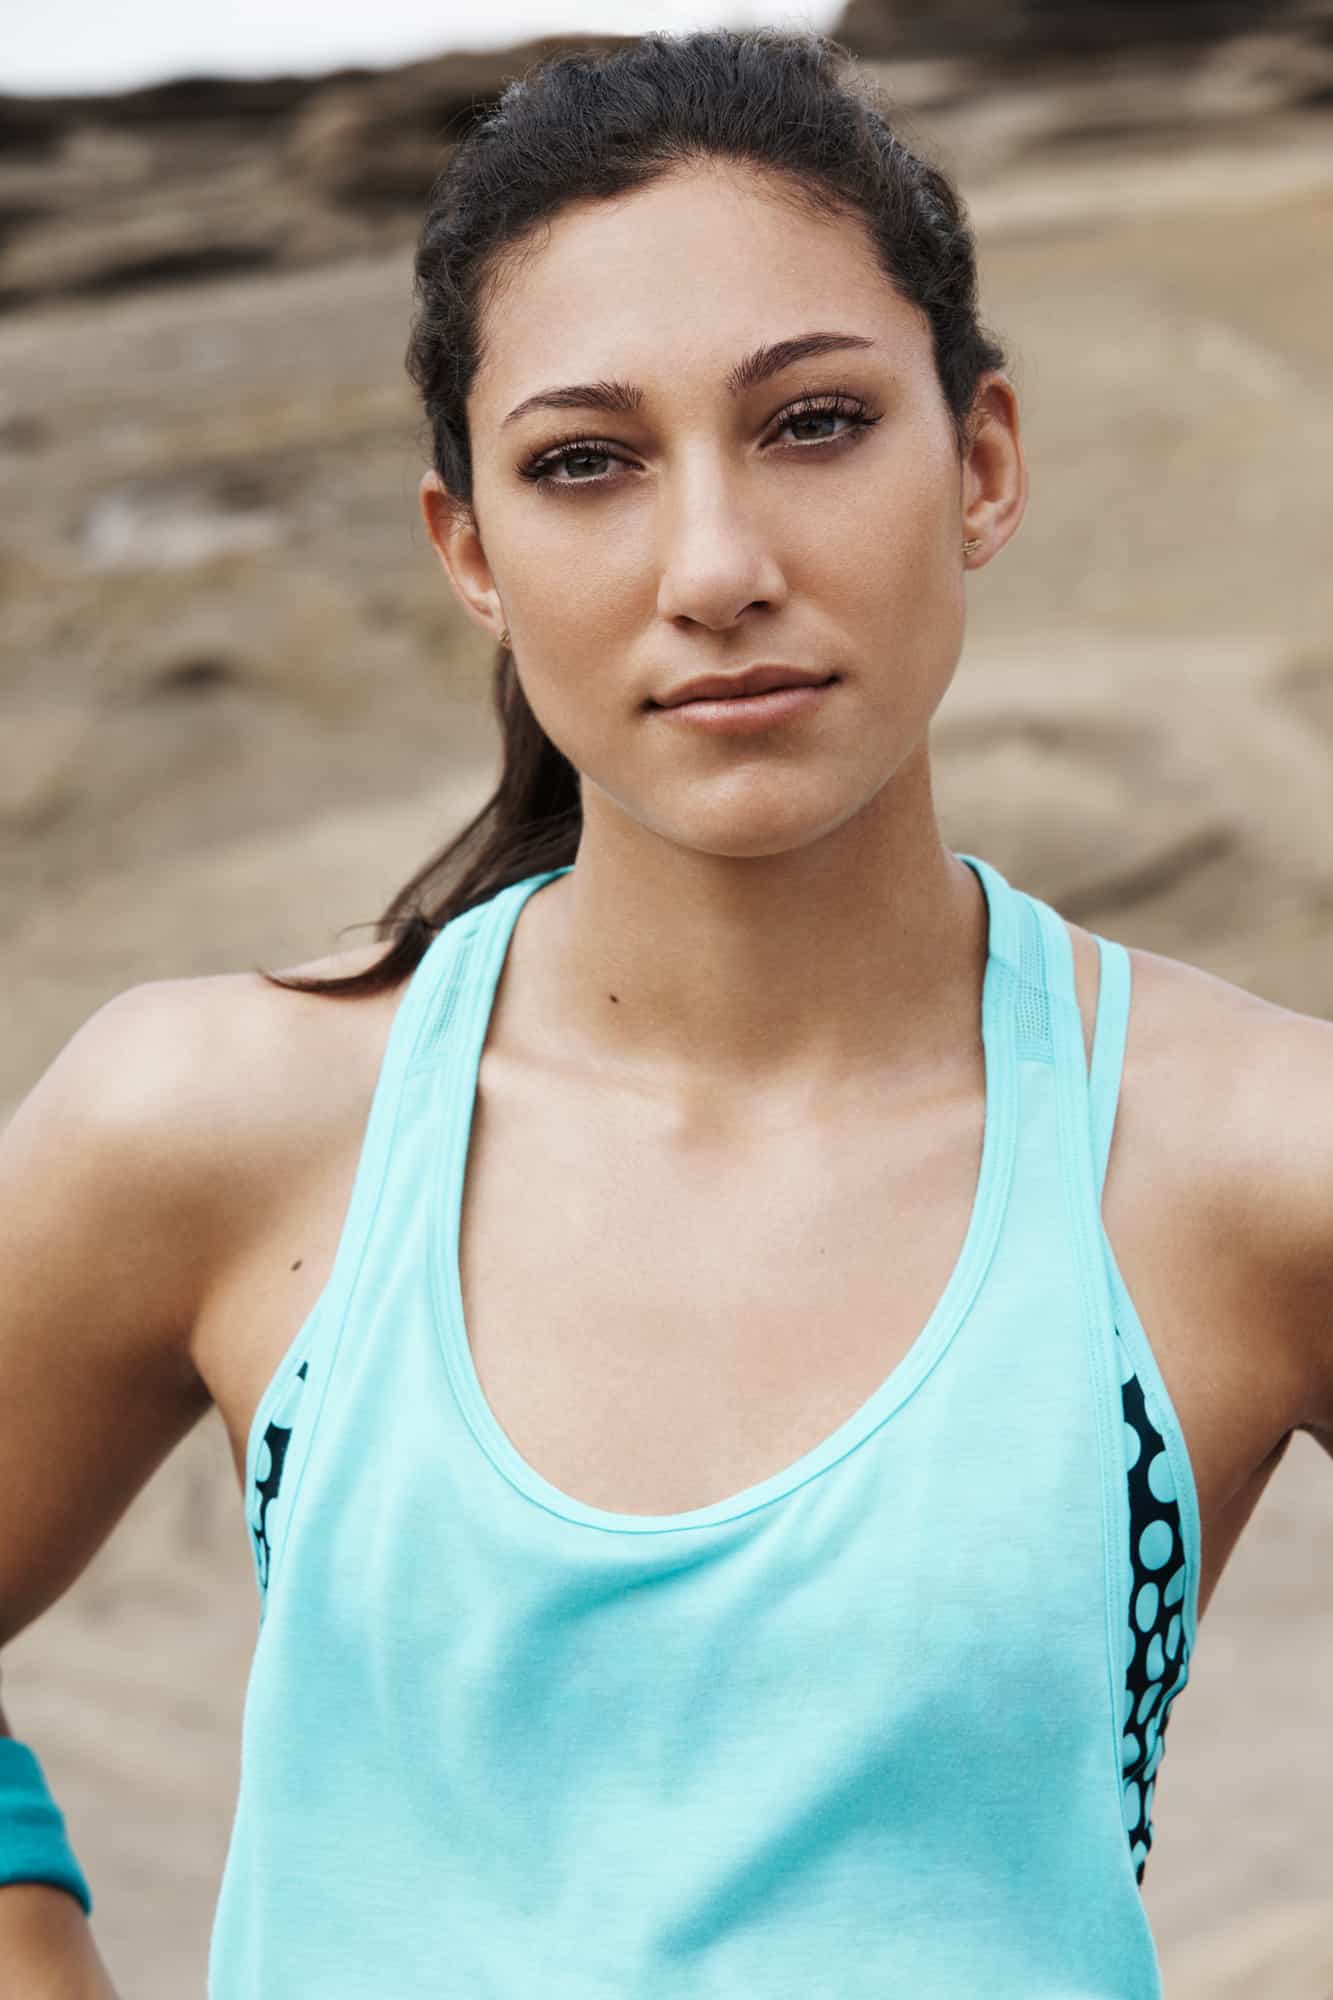 Christen Press Photos (Uploaded By Our Users) .